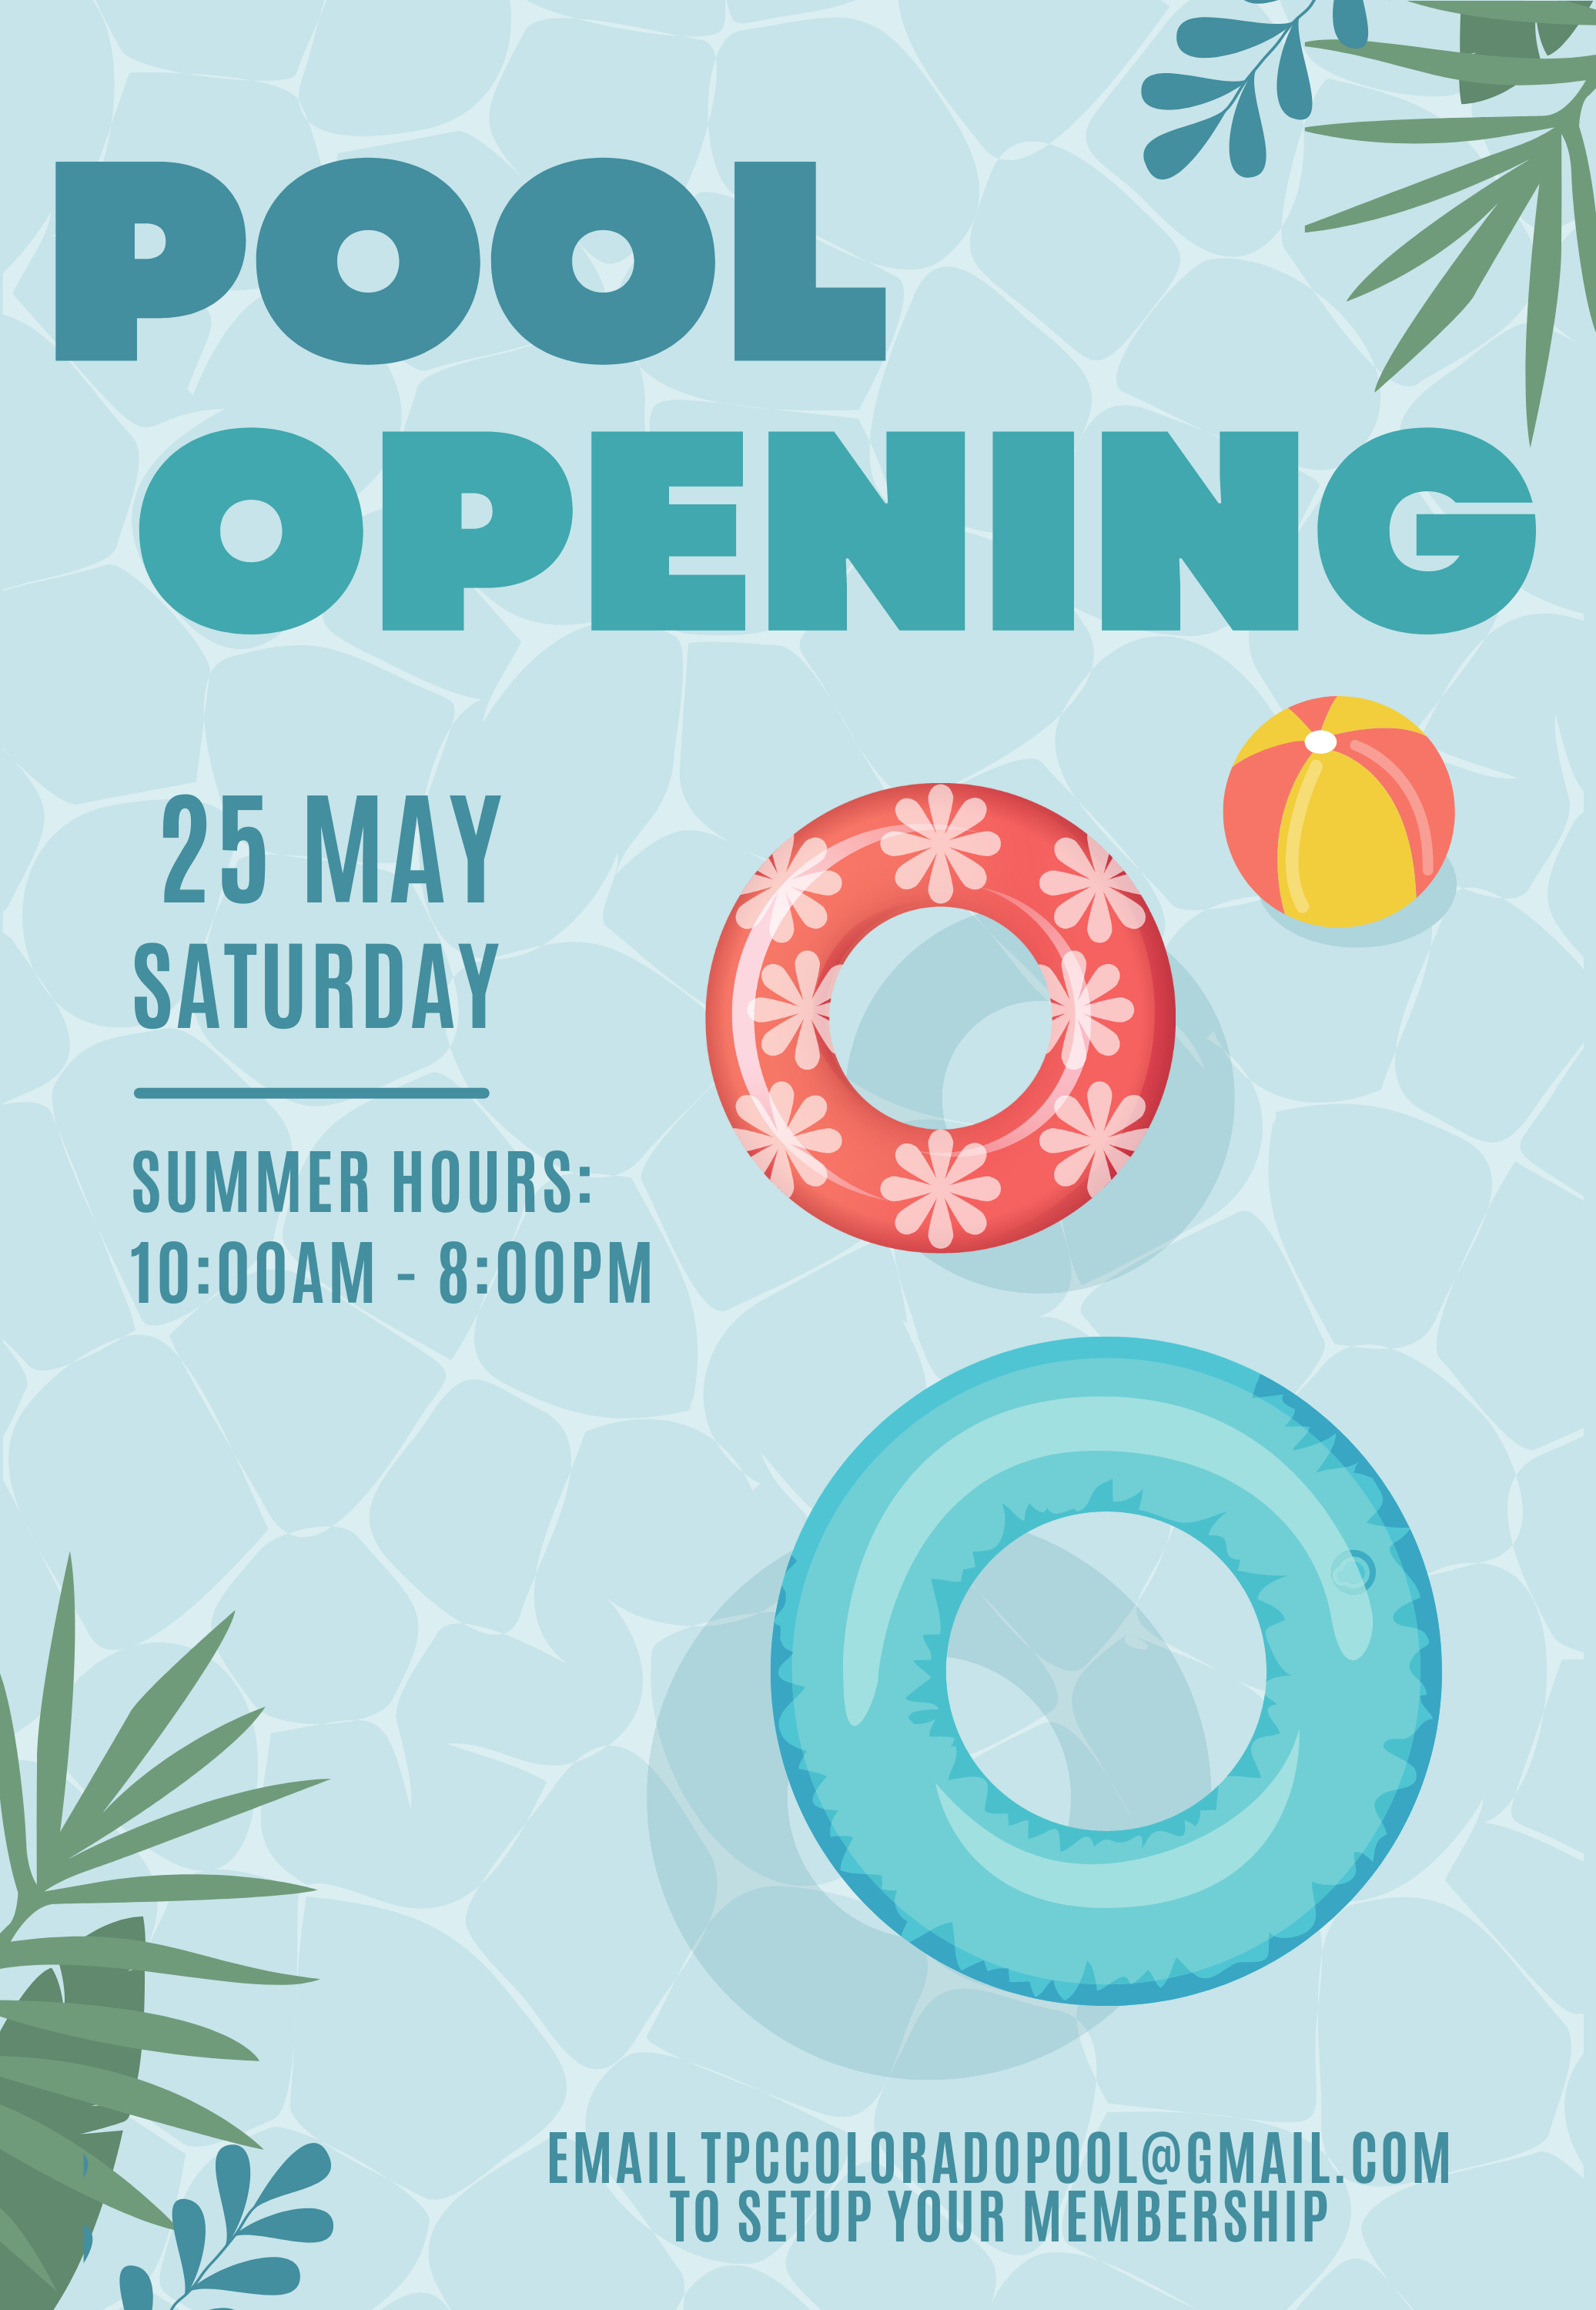 Flyer for the Heron Lakes pool opening day on May 25th